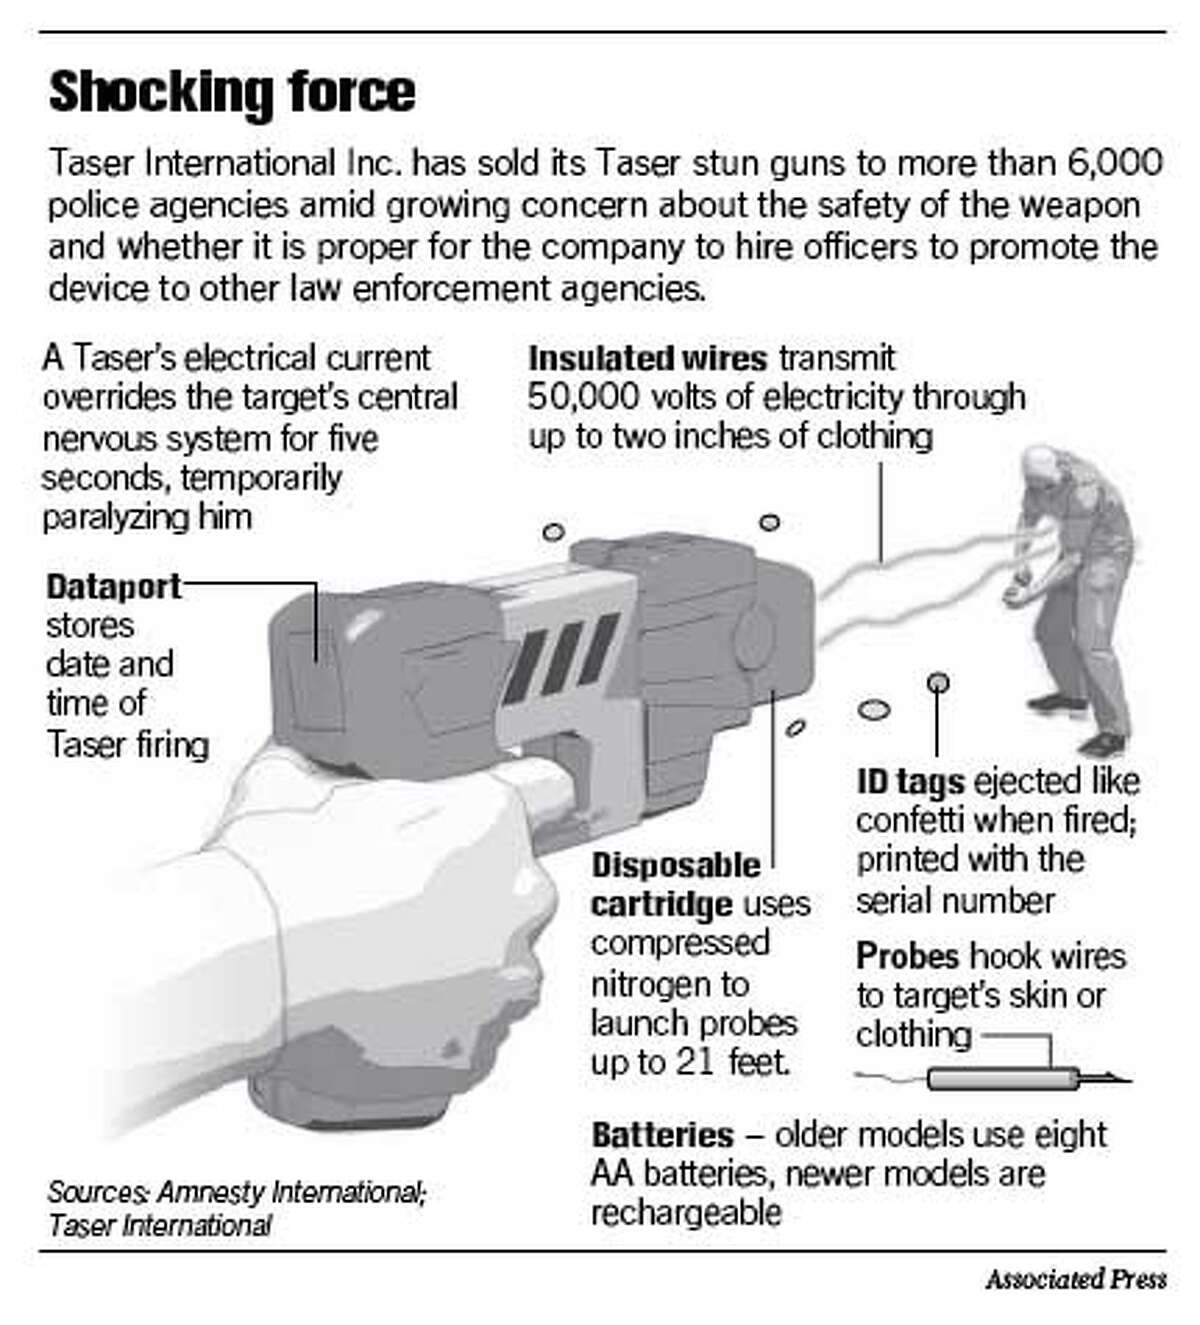 Stun Gun Maker Hires Police To Tout Weapon Critics Say Practice Could Represent Conflict Of